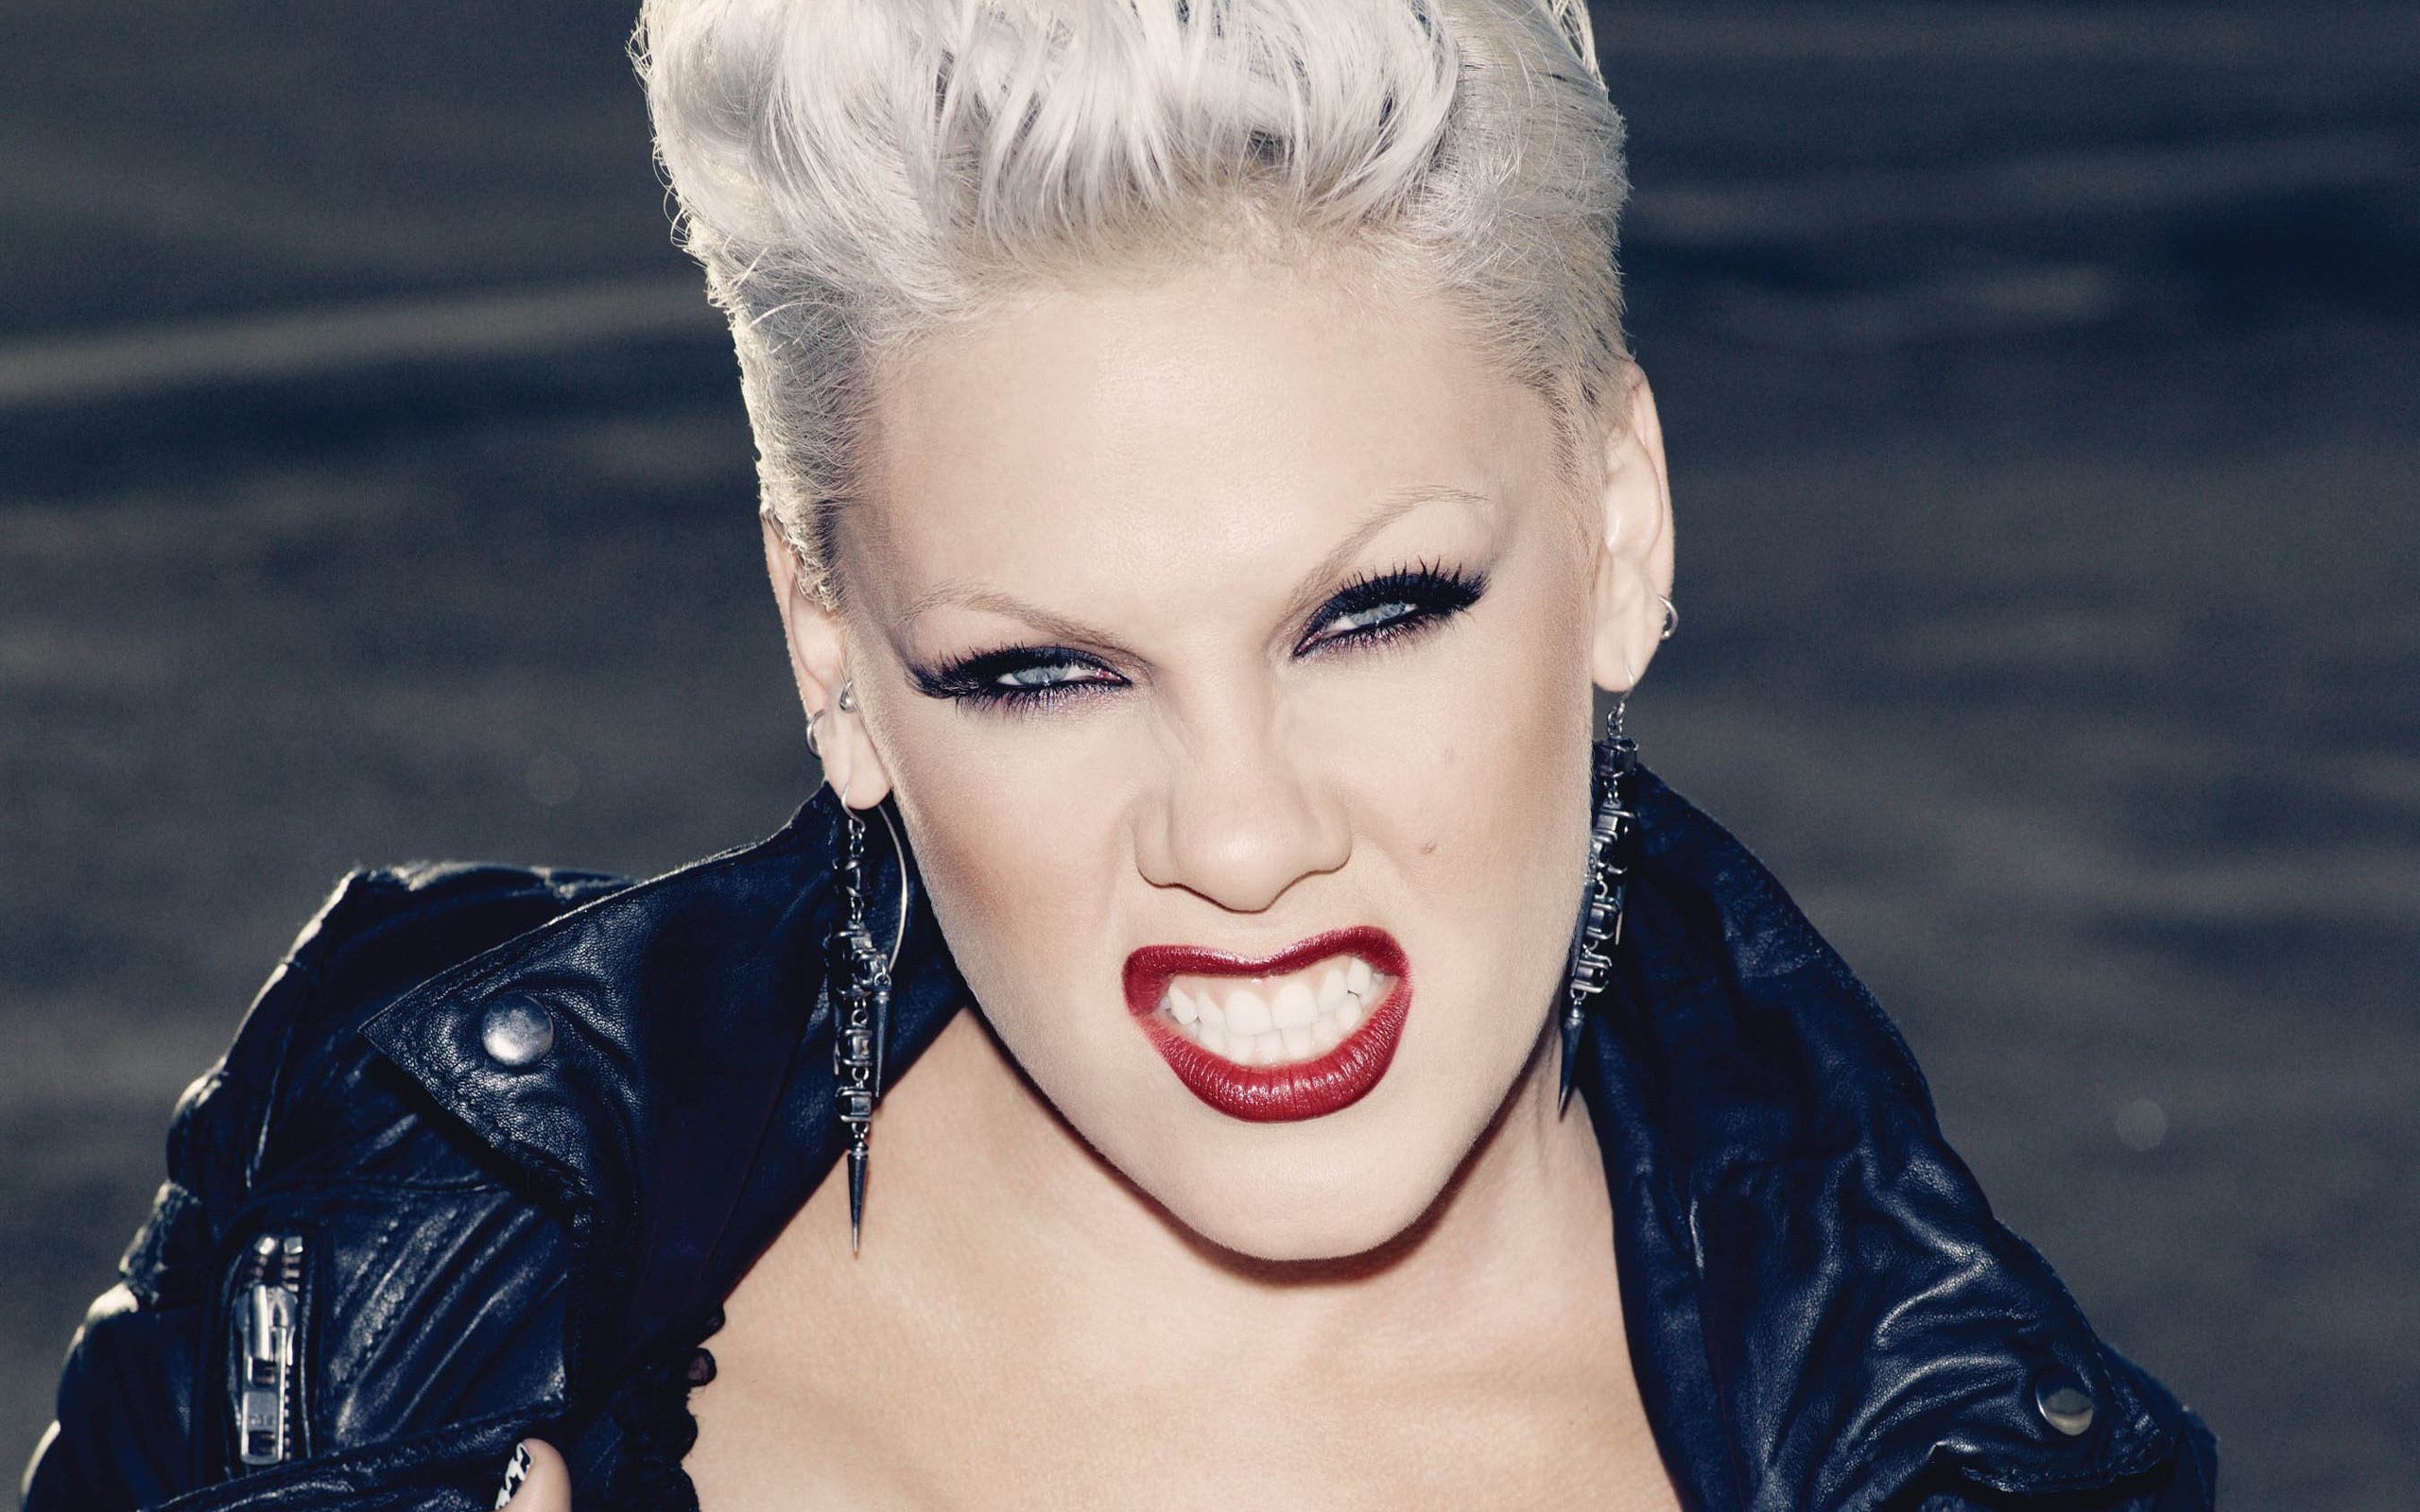 Pink images P!nk wallpaper and background photos (36922577)